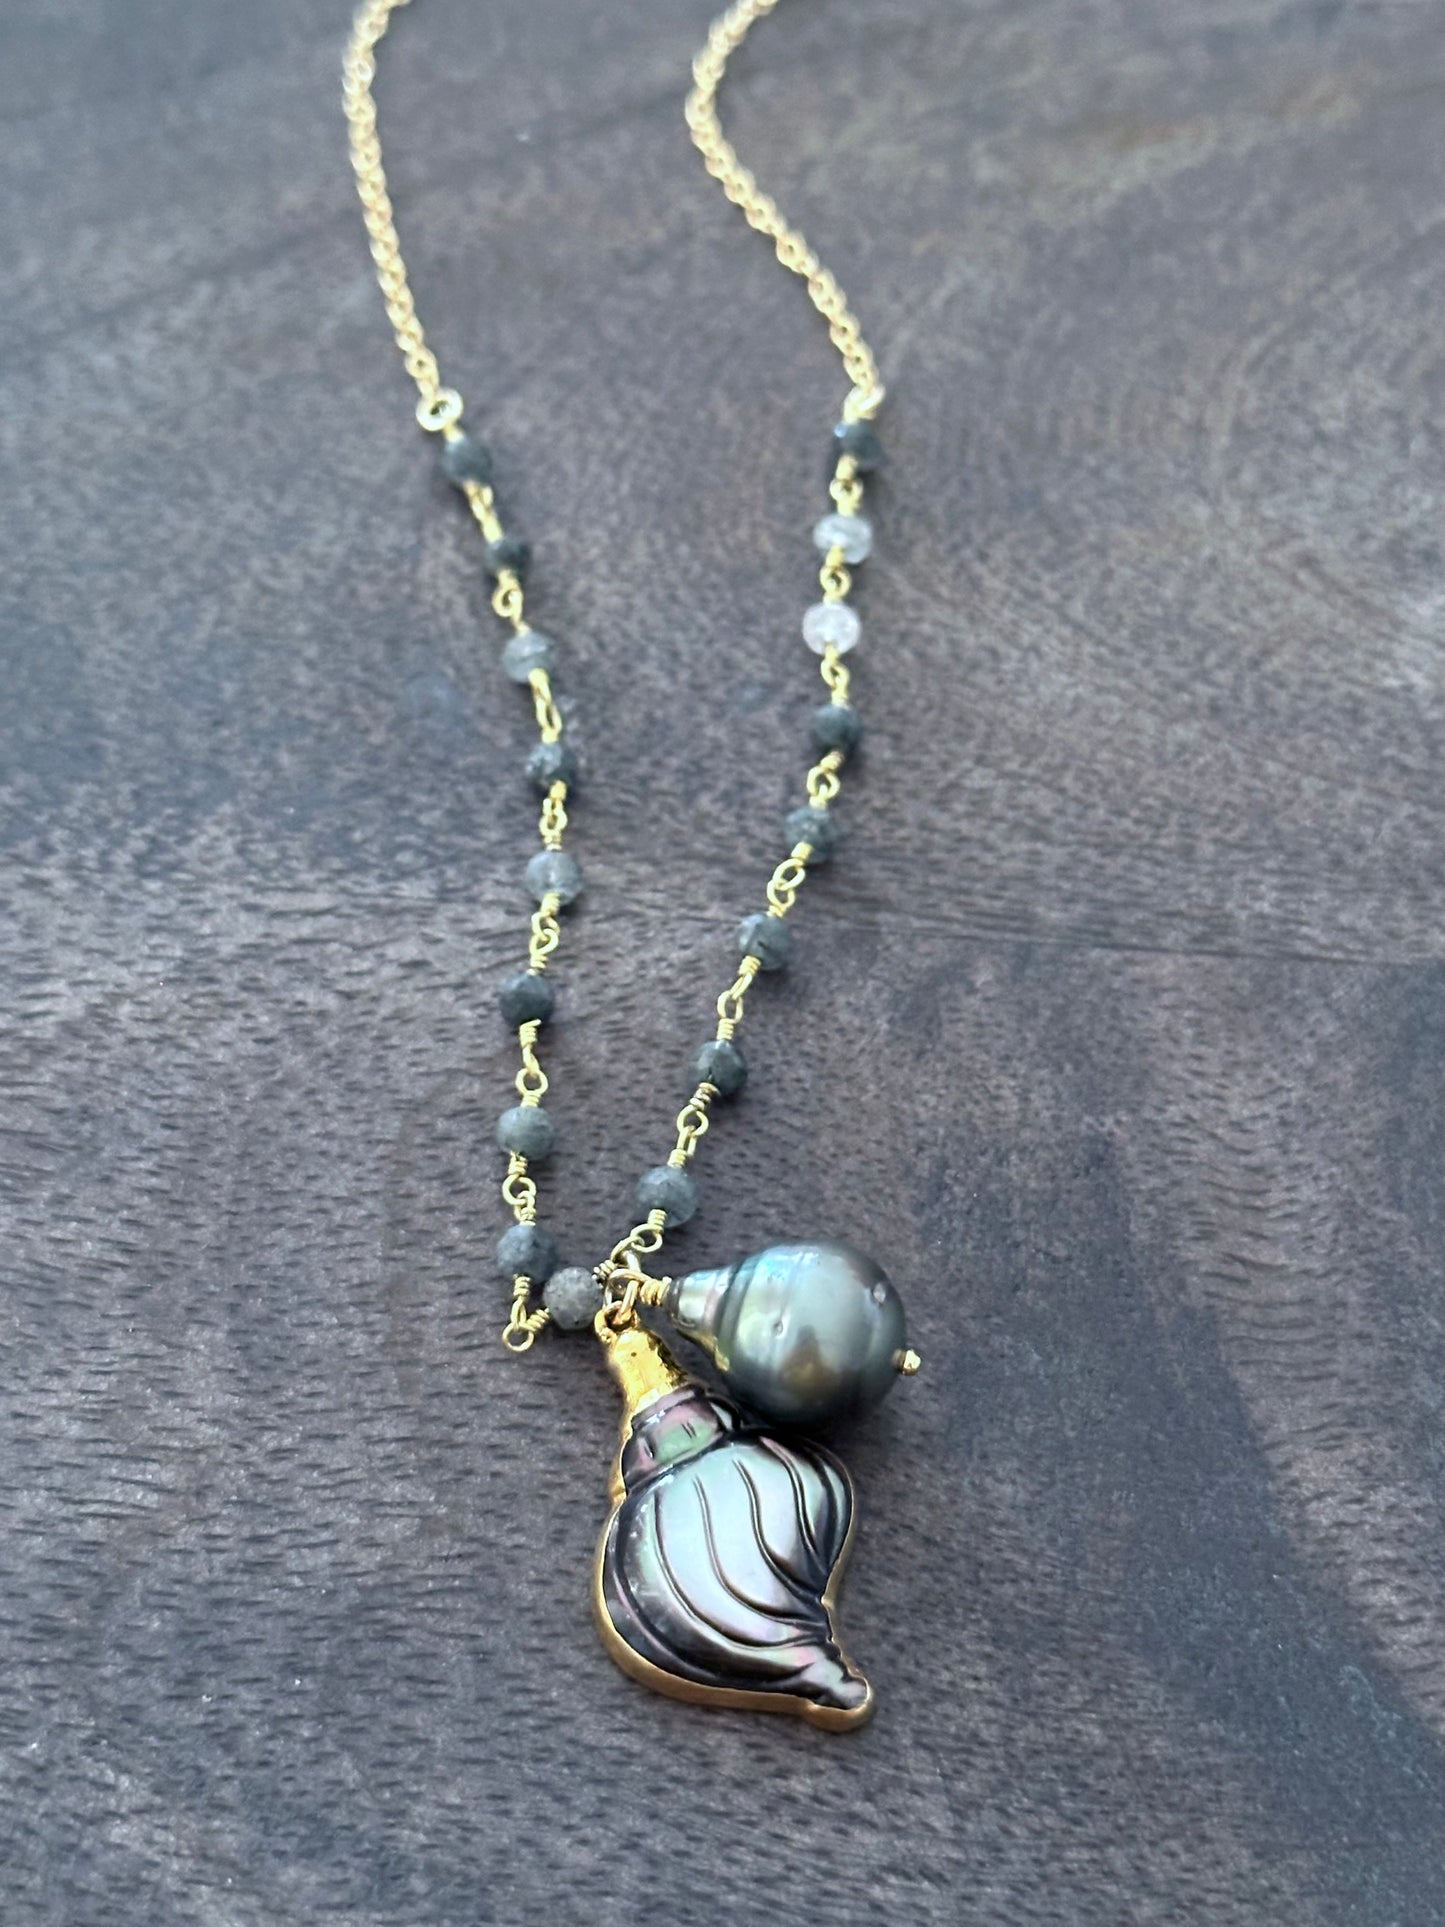 a necklace with grey beads wire wrapped in a rosary chain. there are two pendants n the center, one is a carved motherof pearl grey shell and the other is a tahitian pearl.